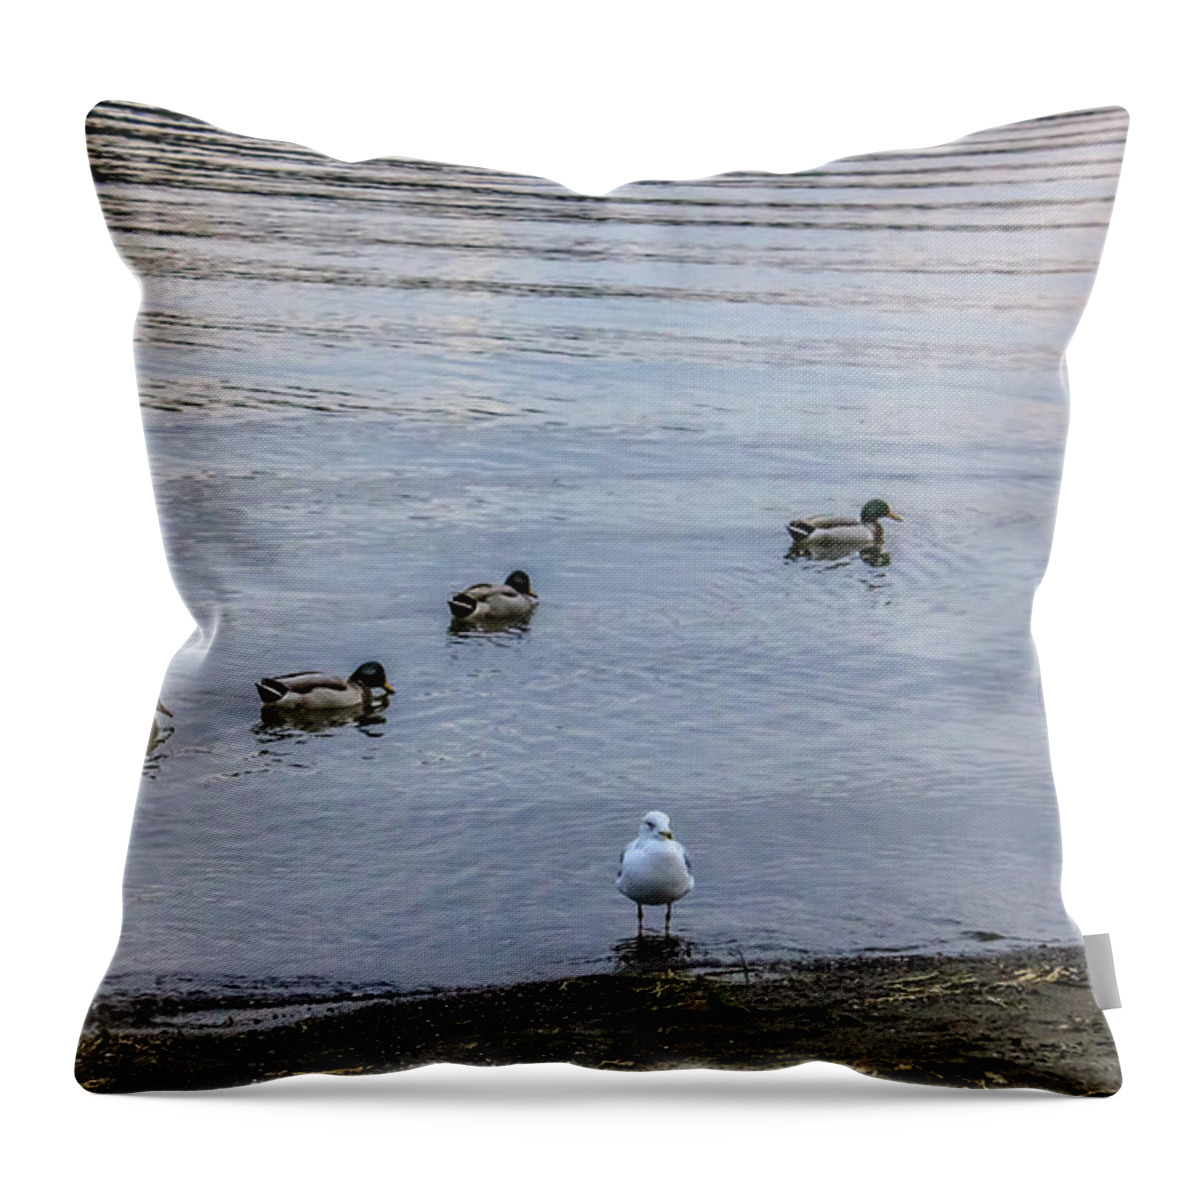 Ducks Throw Pillow featuring the photograph Ducks by Anamar Pictures